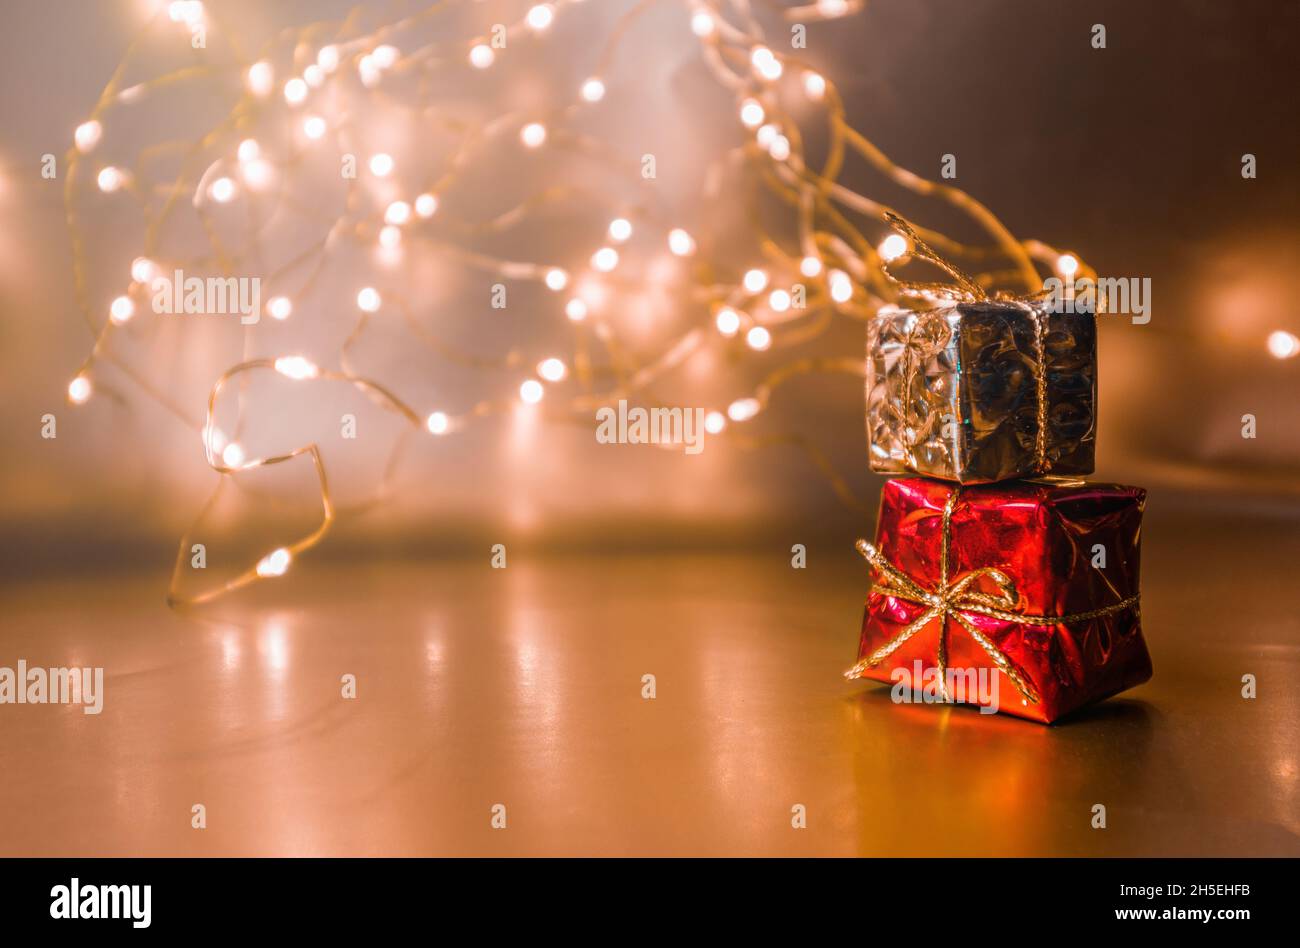 Christmas gold background with gifts. Stock Photo